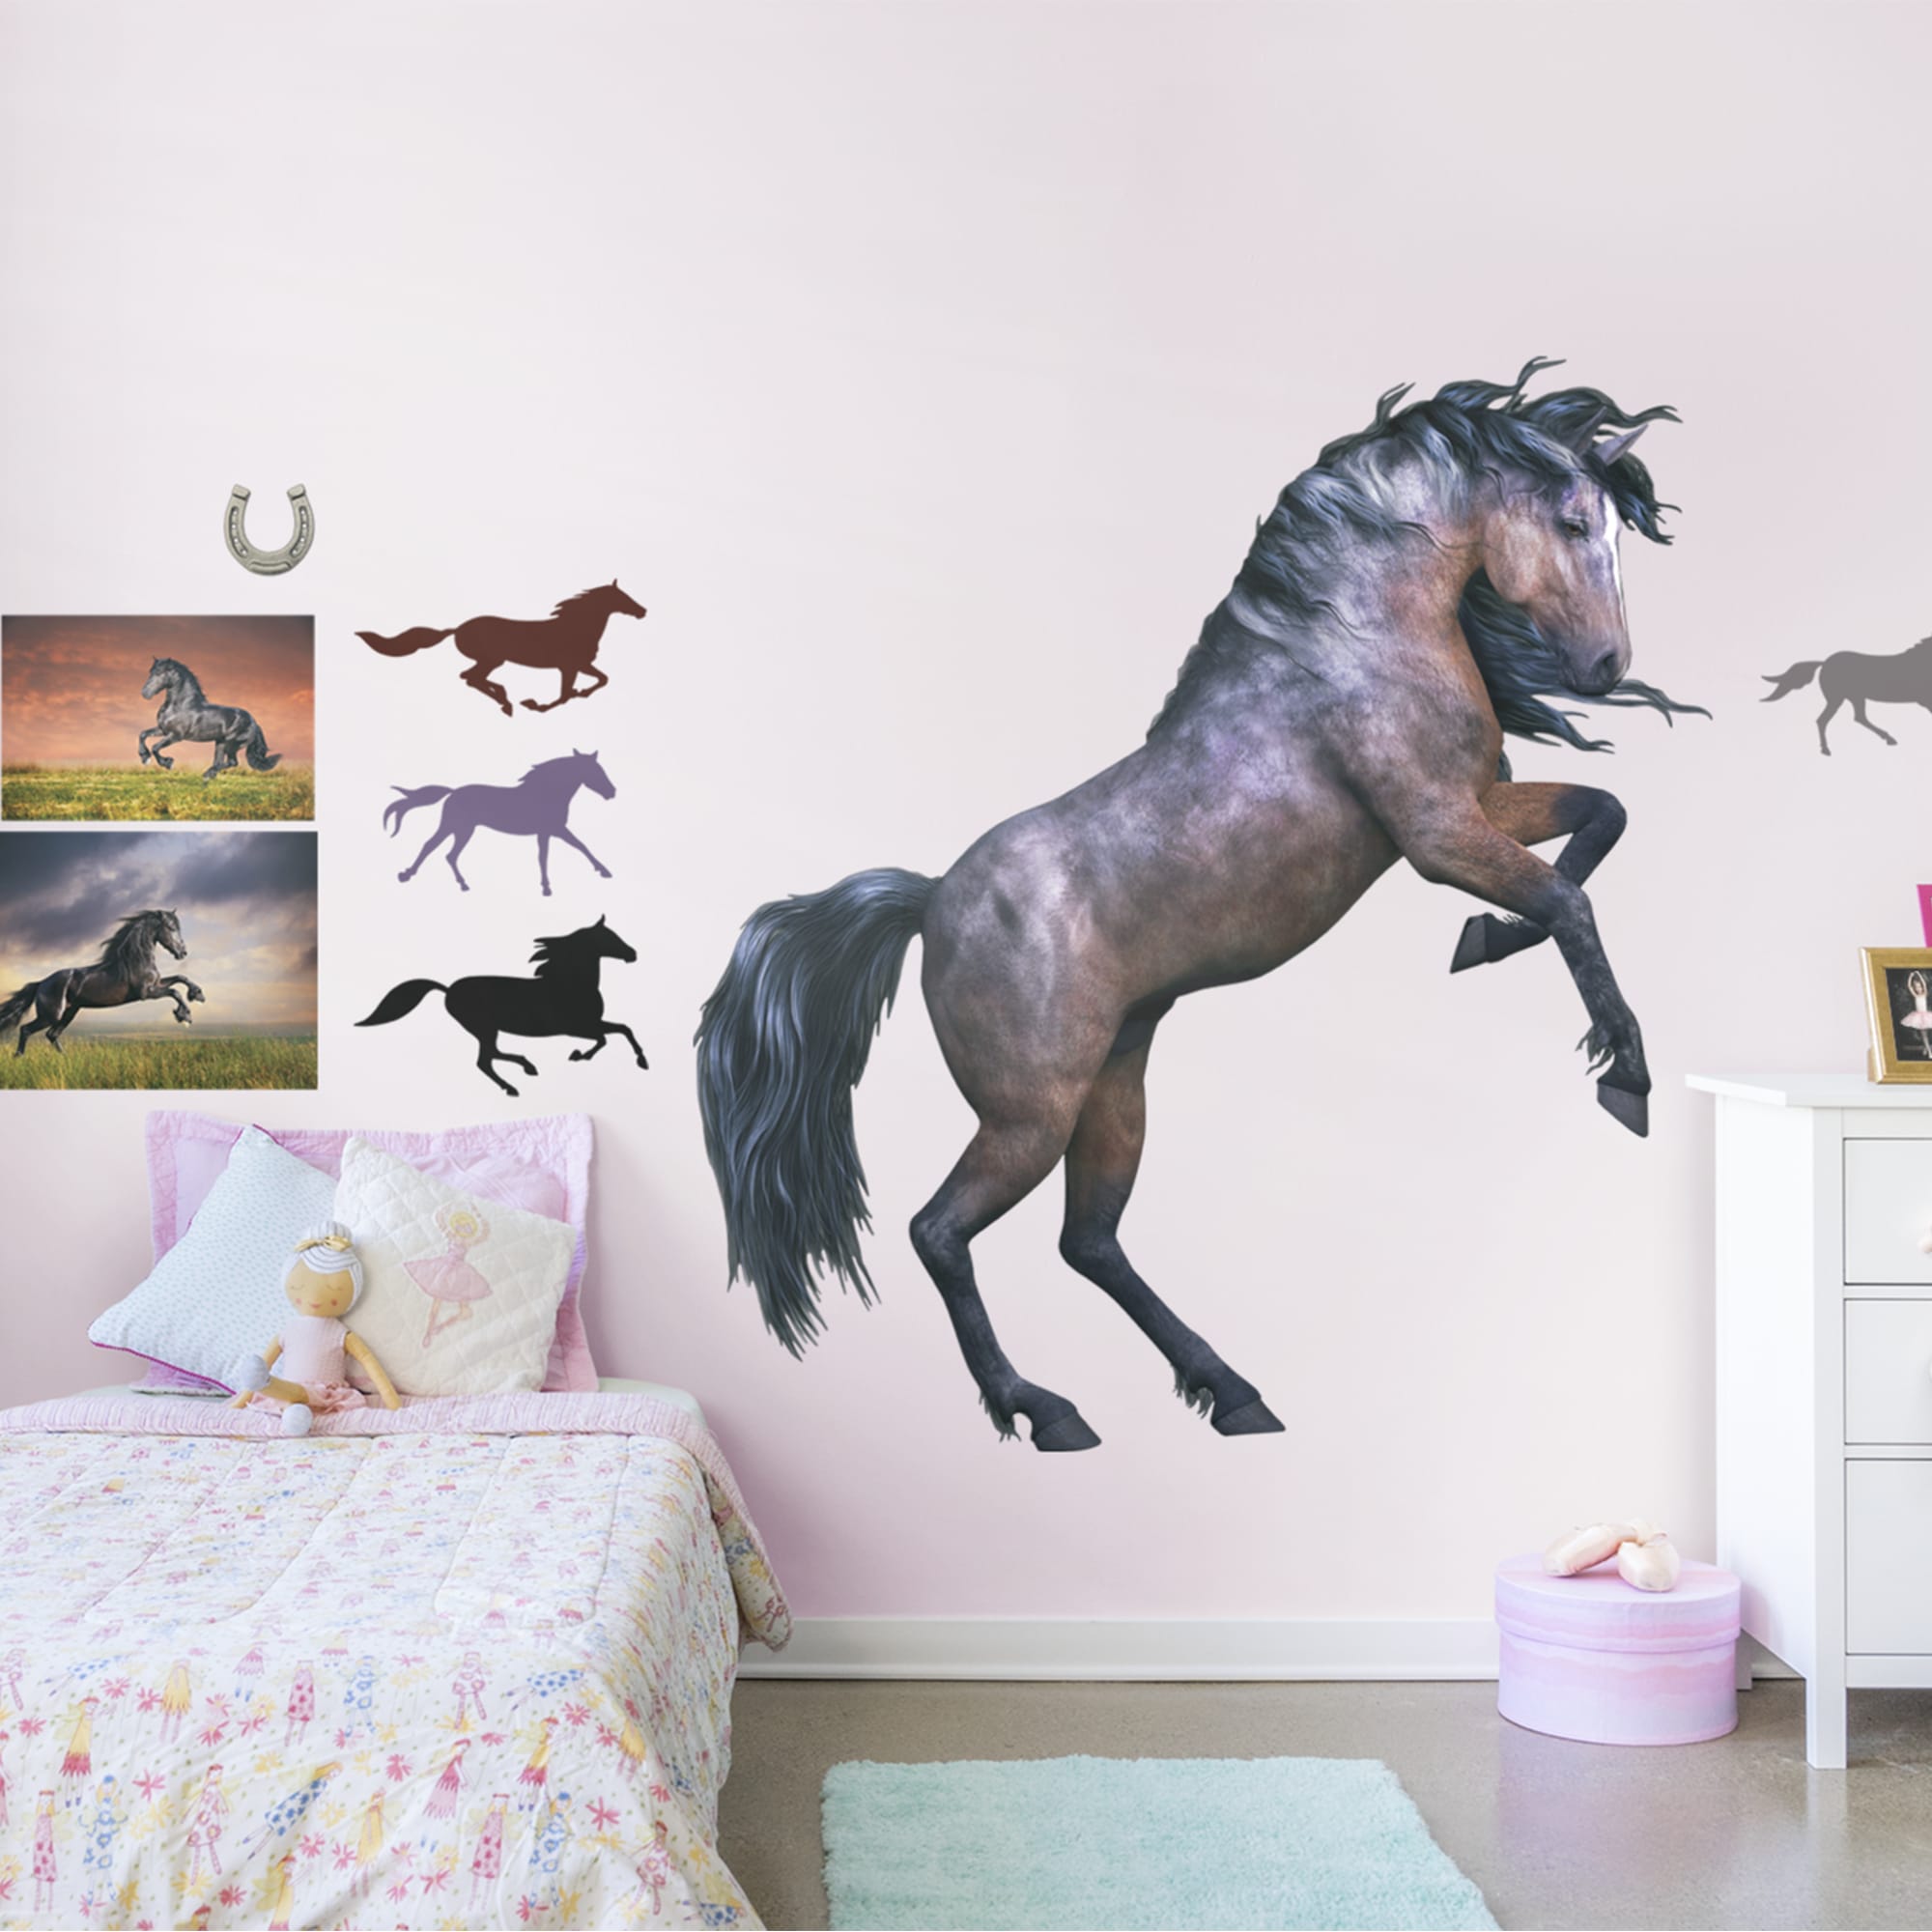 Dark Horse - Removable Vinyl Decal Huge Animal + 11 Decals (62"W x 66"H) by Fathead